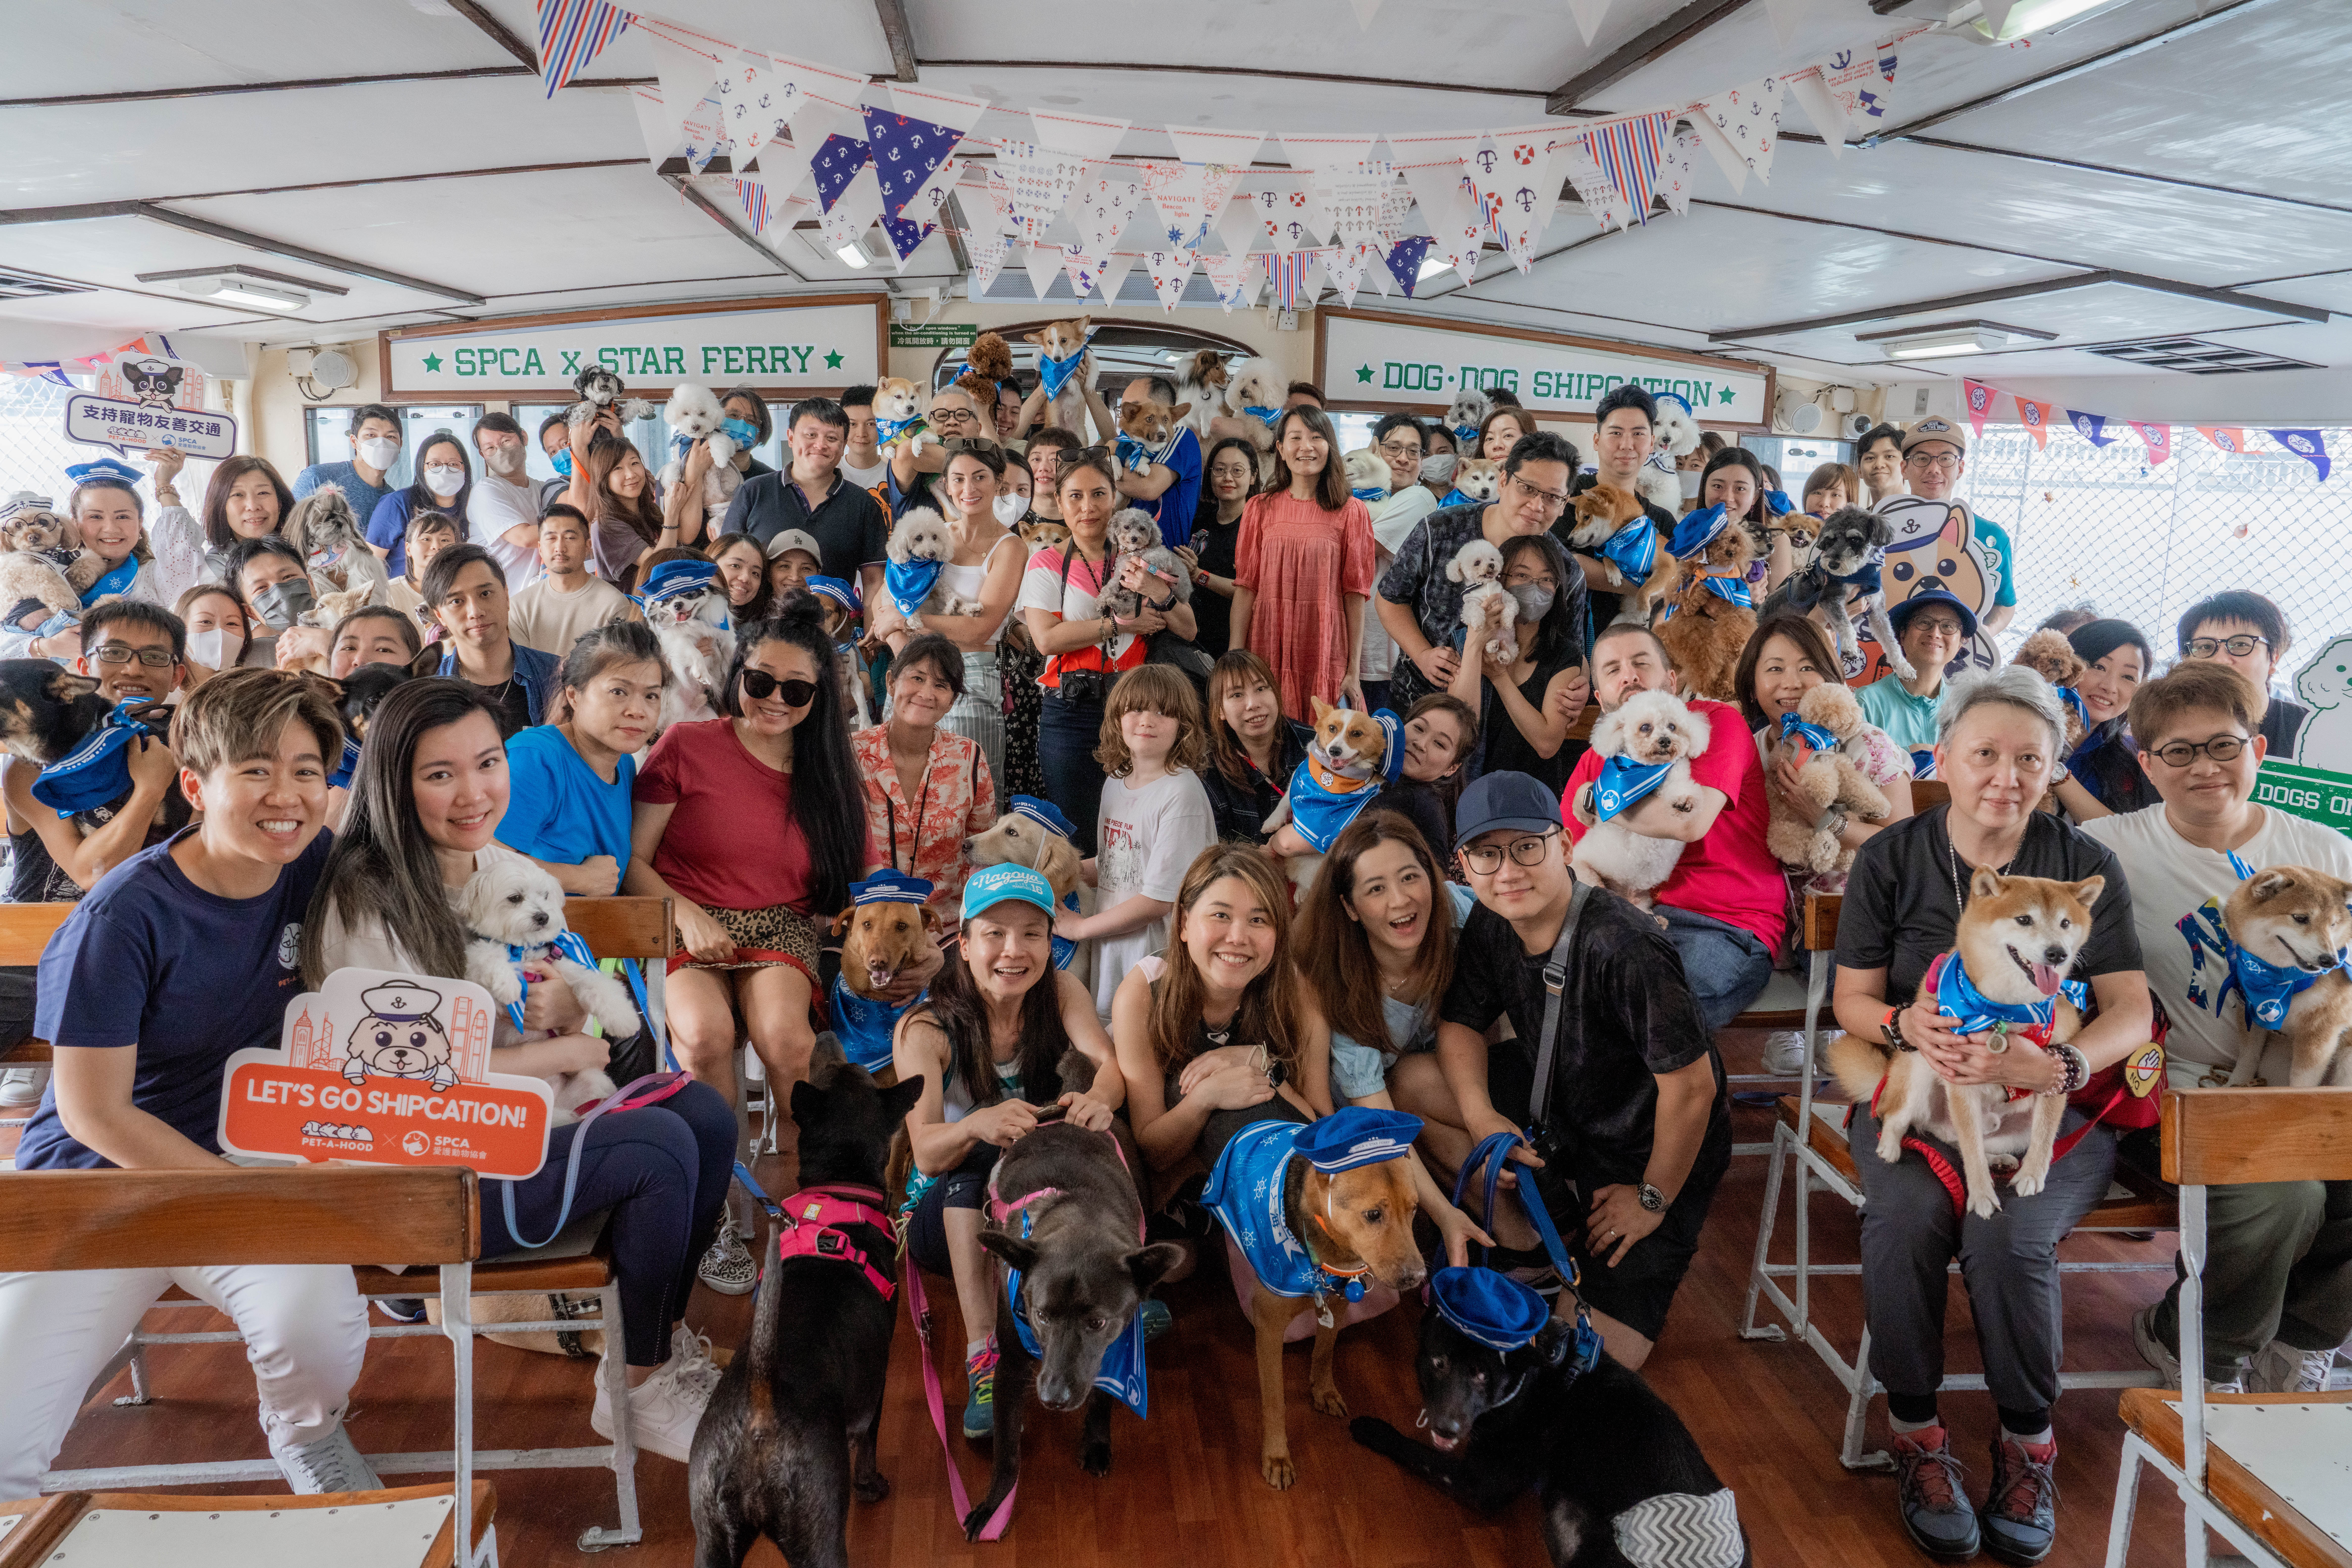 SPCA Dog．Dog Shipcation｜The 1st-ever Star Ferry's Harbour Tour for DOG